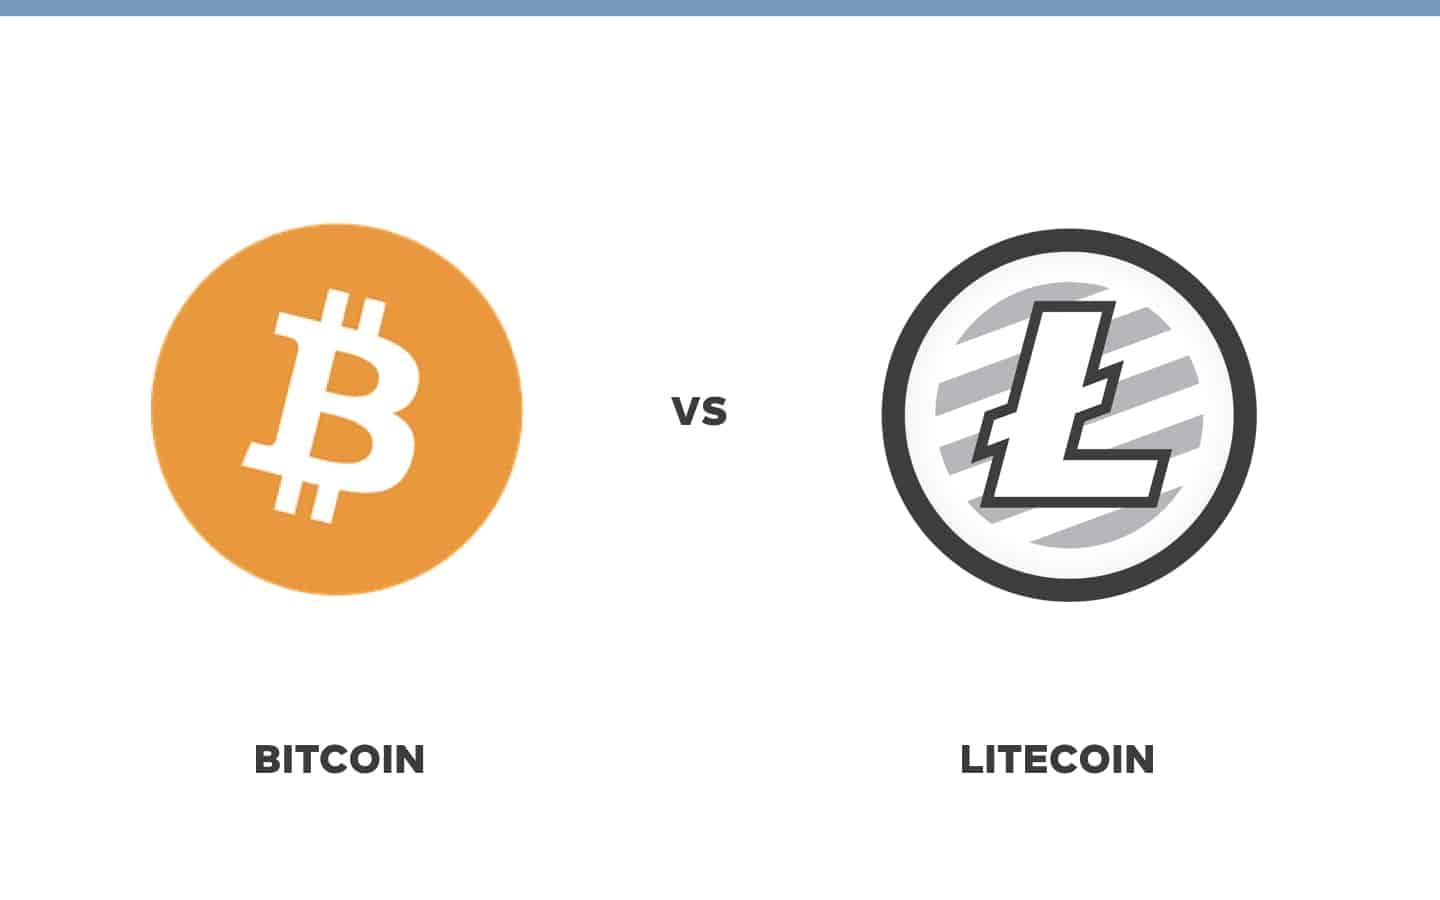 Litecoin wallet review: Hardware wallets and software wallets